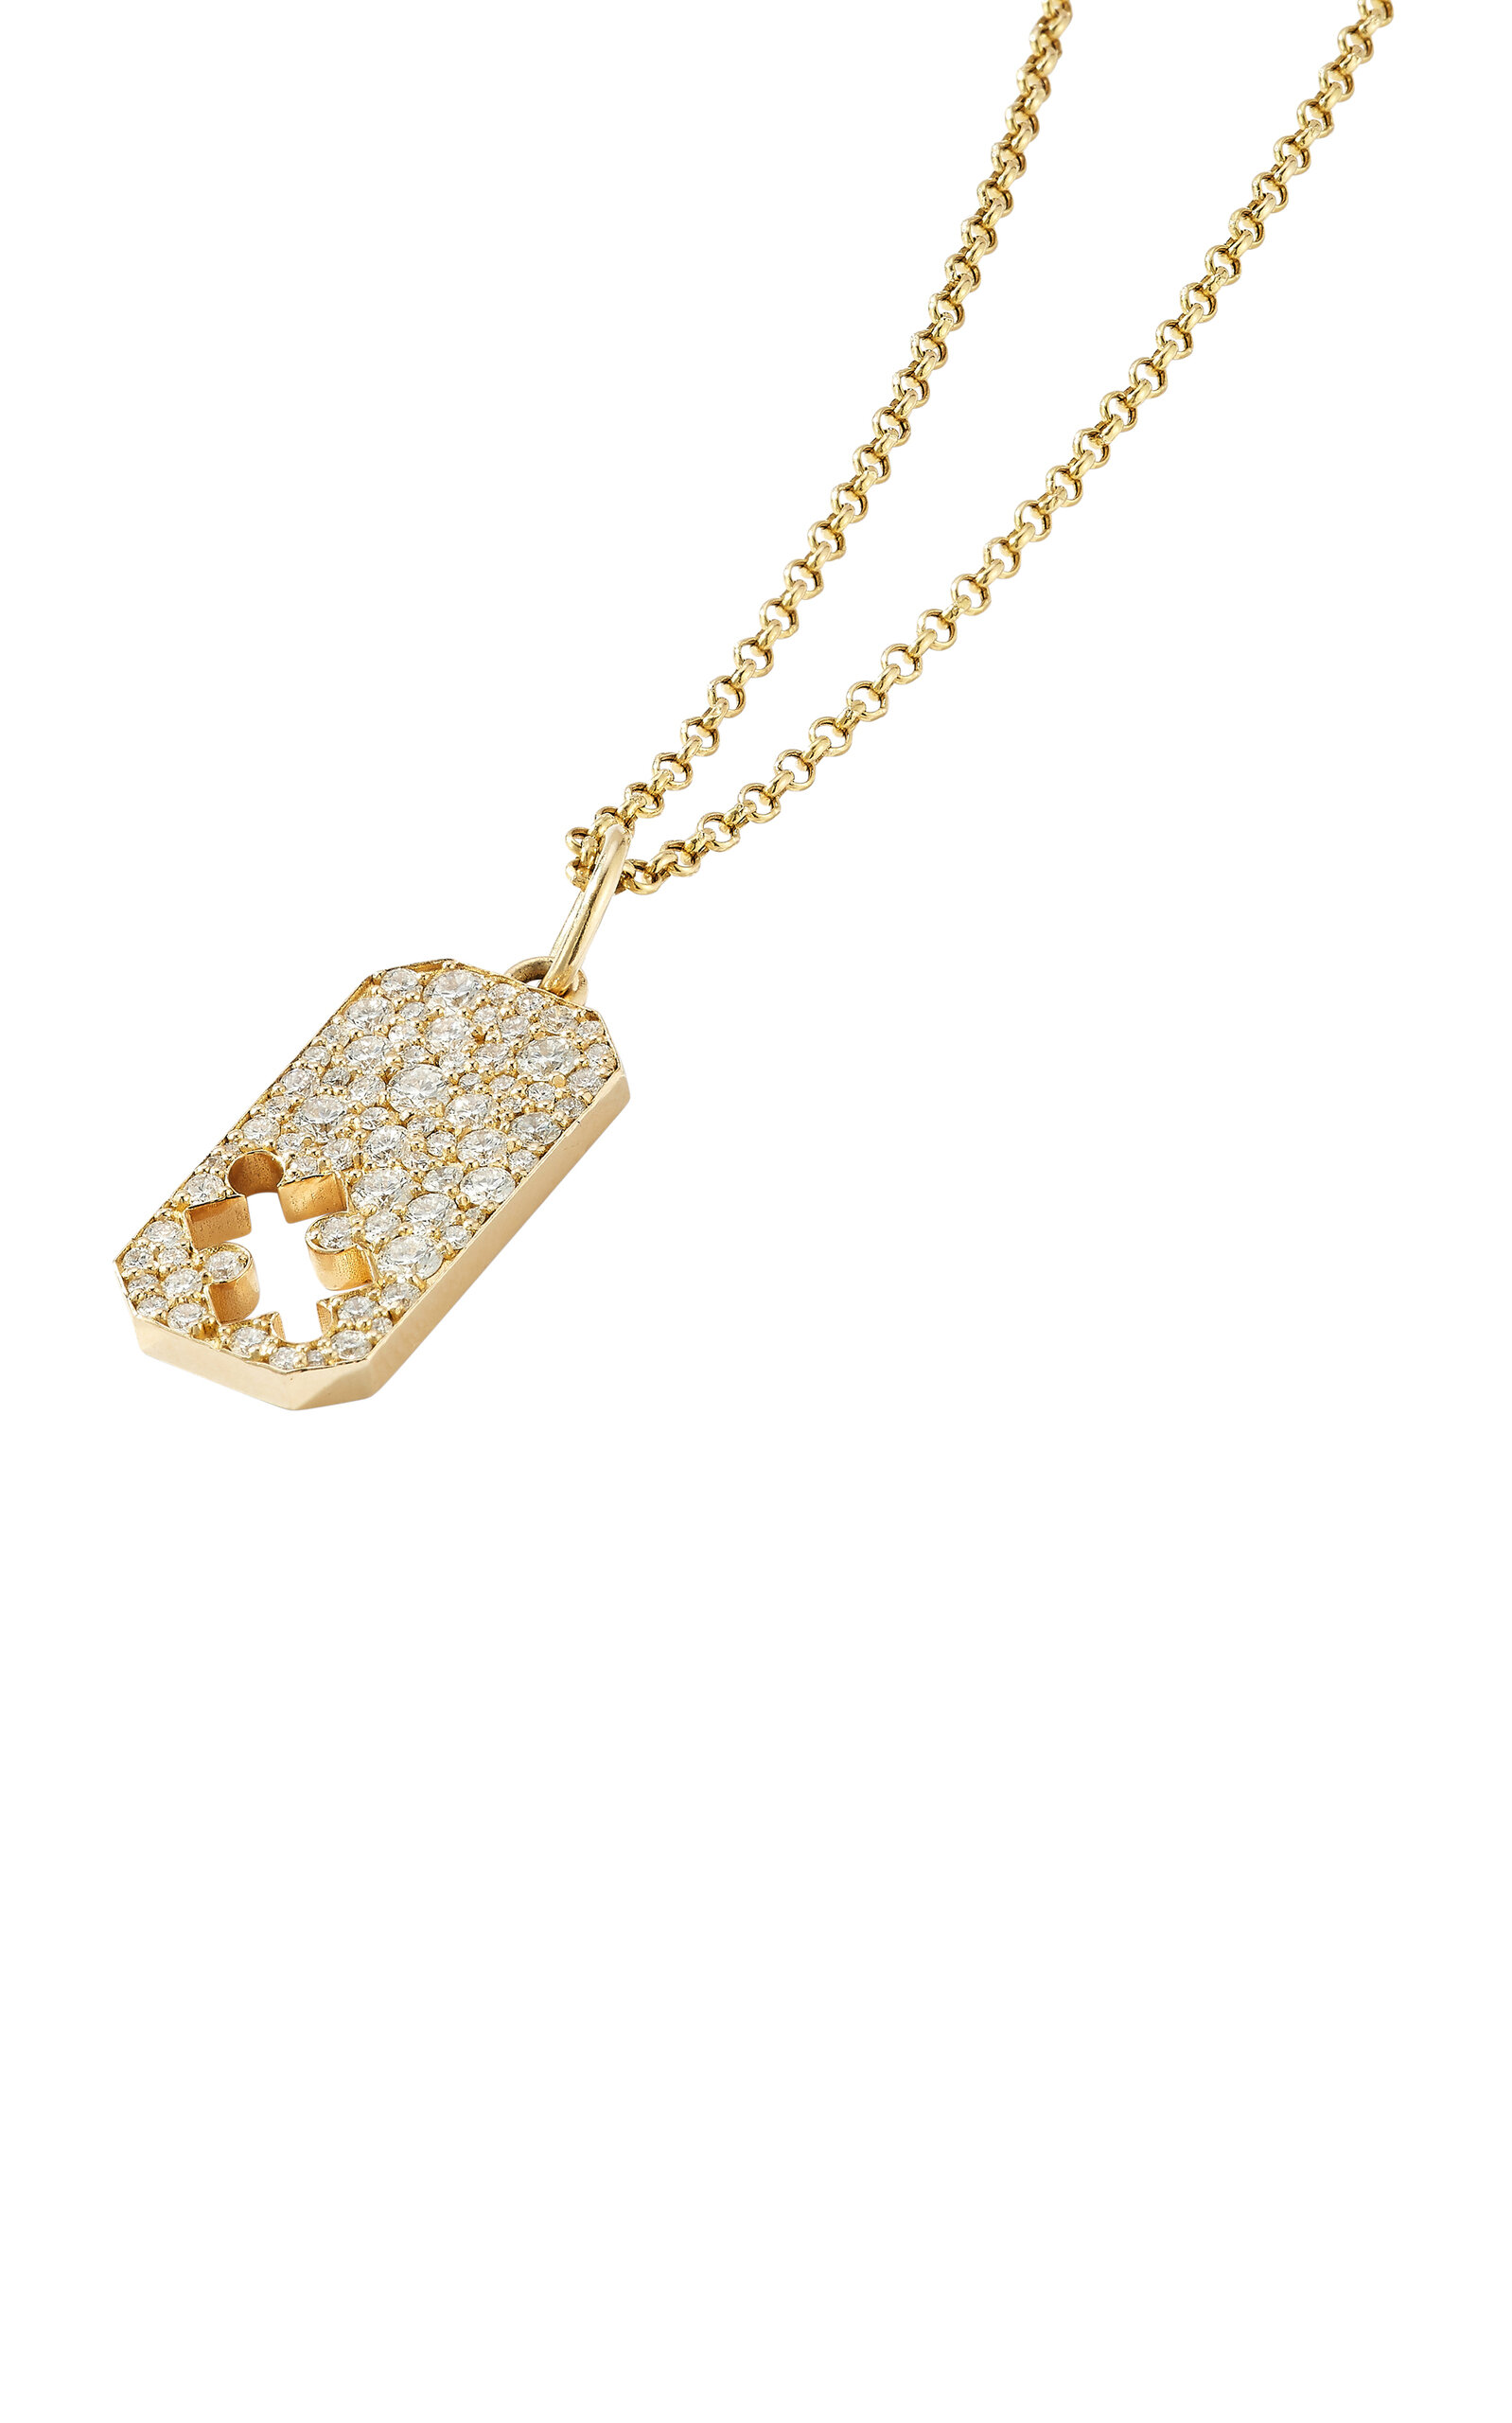 Shop Concept26 Missing Piece 14k Yellow Gold Diamond Dog Tag Necklace